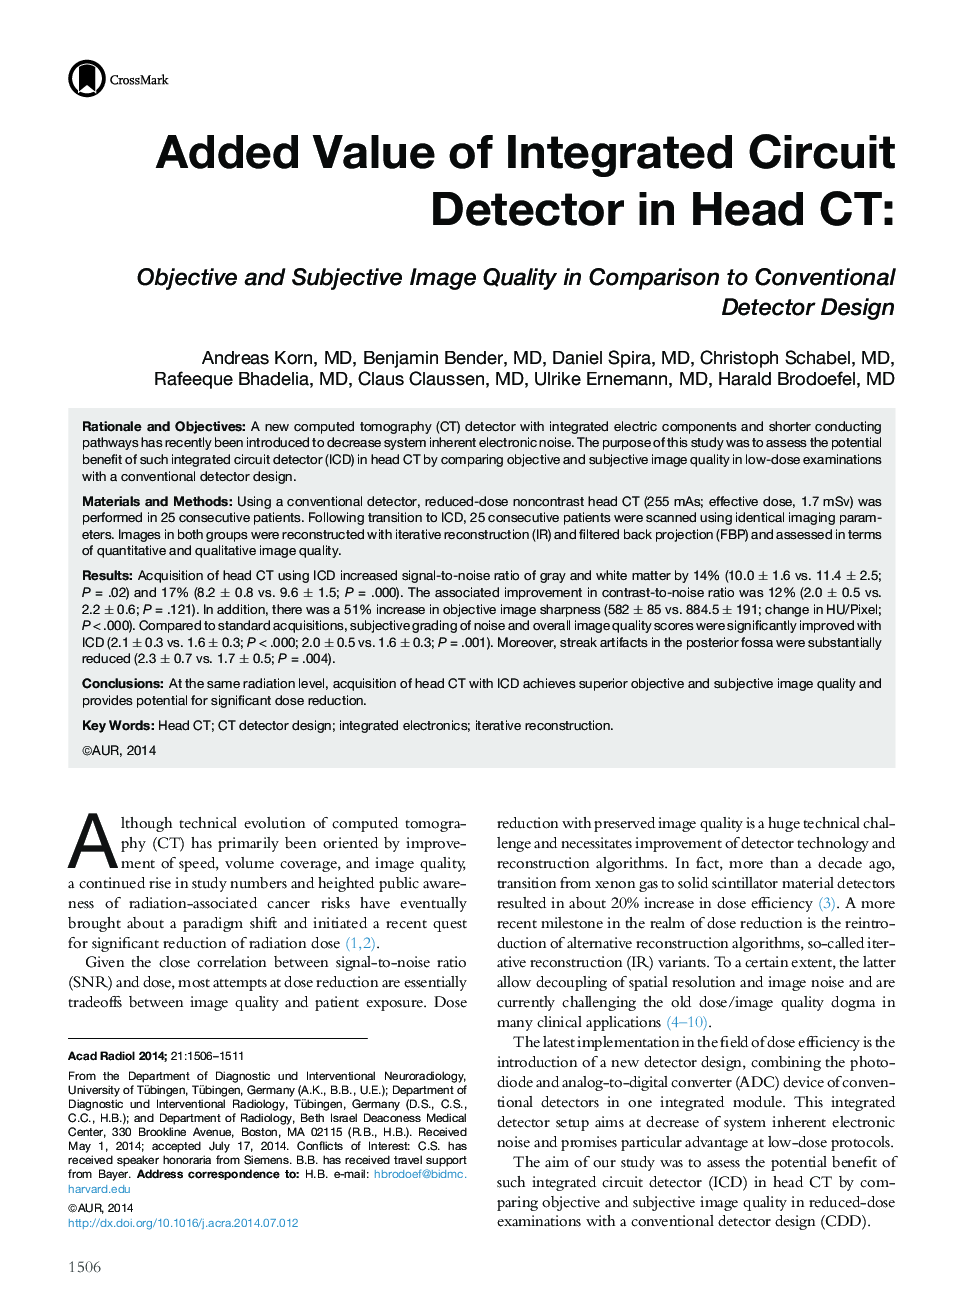 Added Value of Integrated Circuit Detector in Head CT